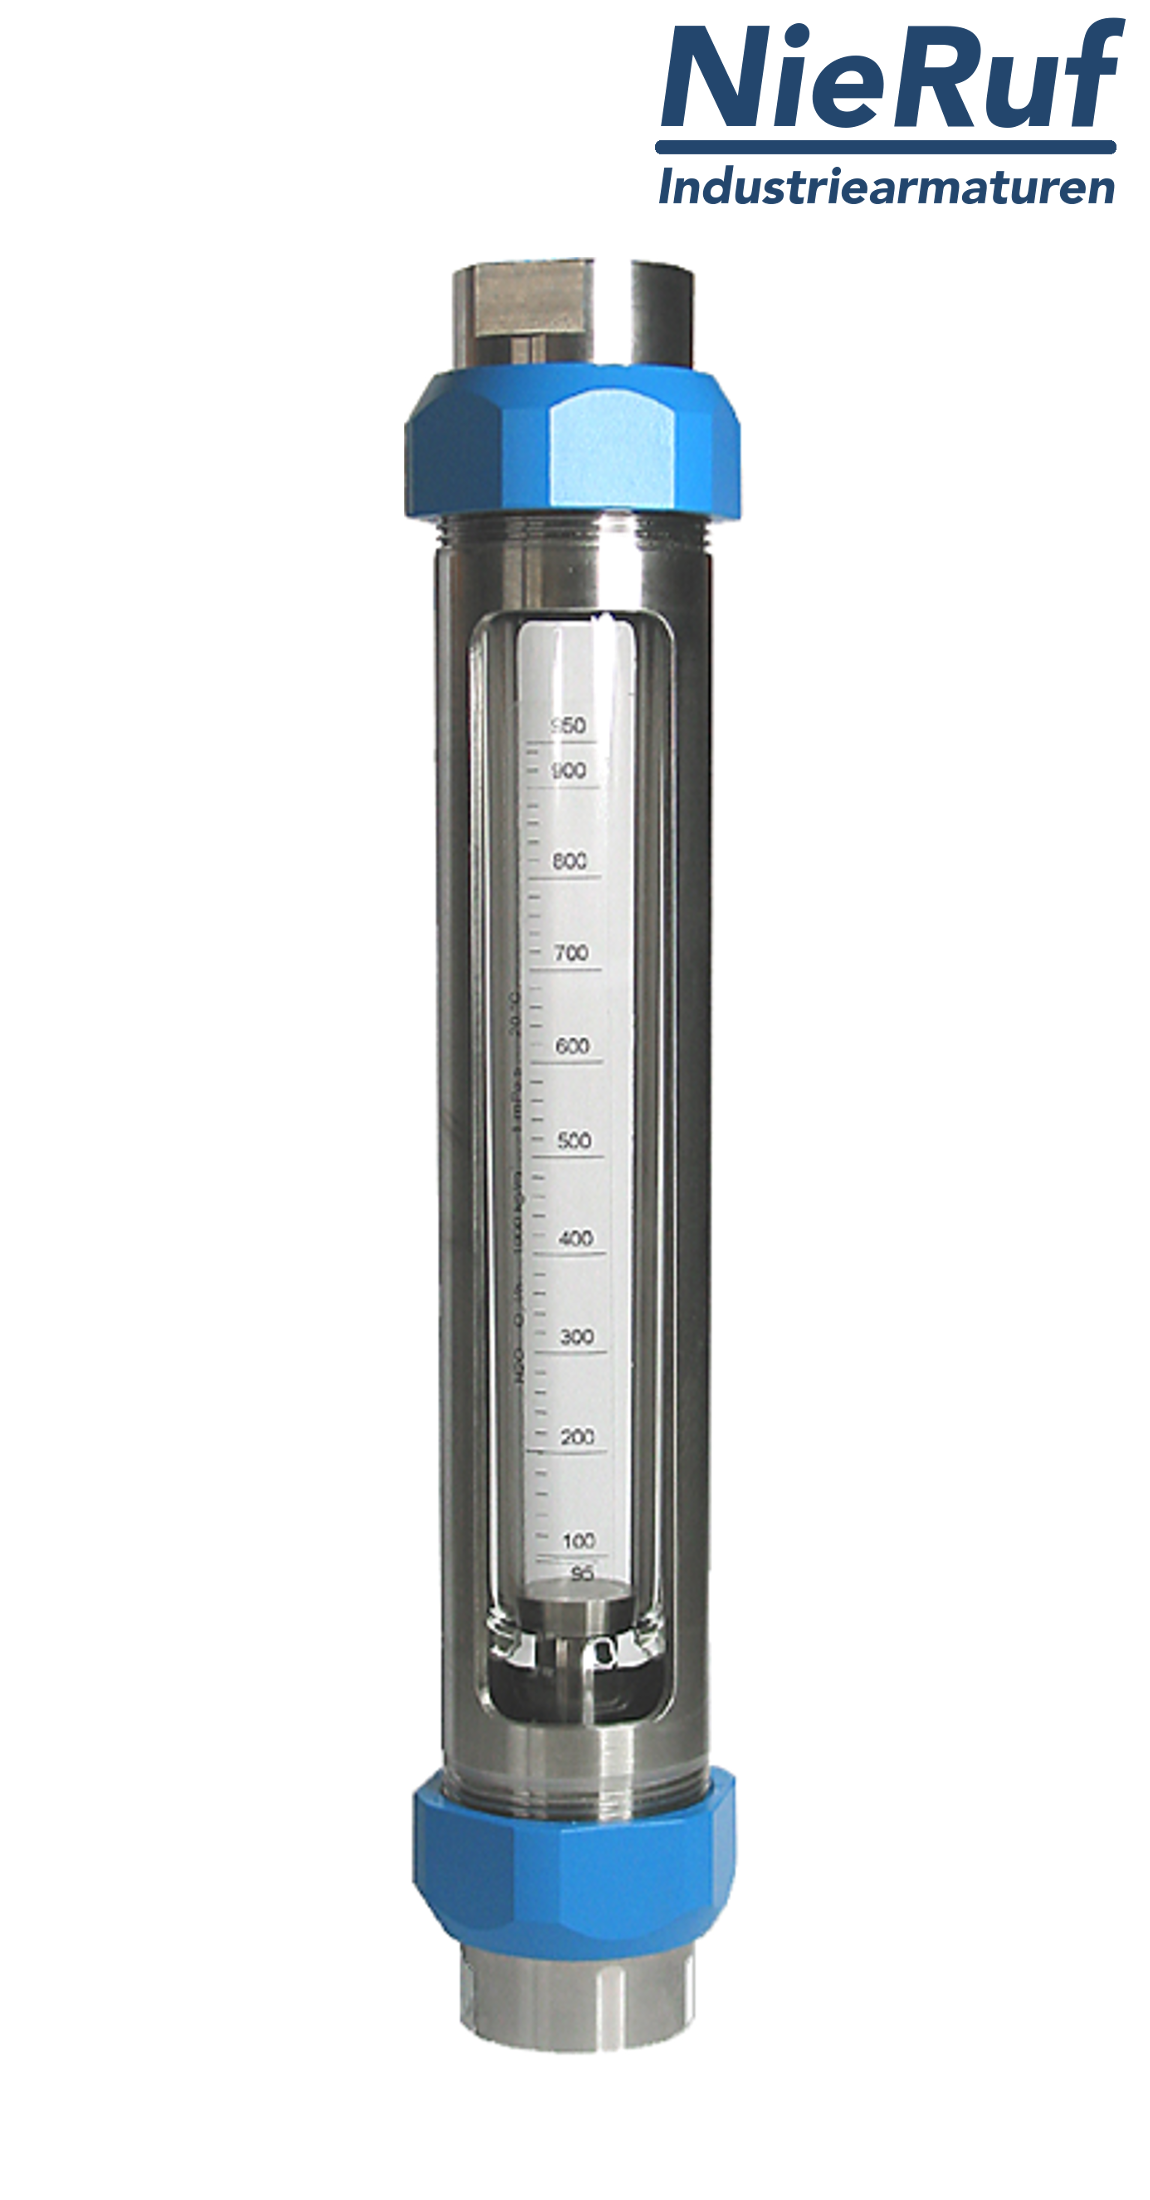 Variable area flowmeter stainless steel + borosilicate 1" Inch 80.0 - 800 l/h water FKM